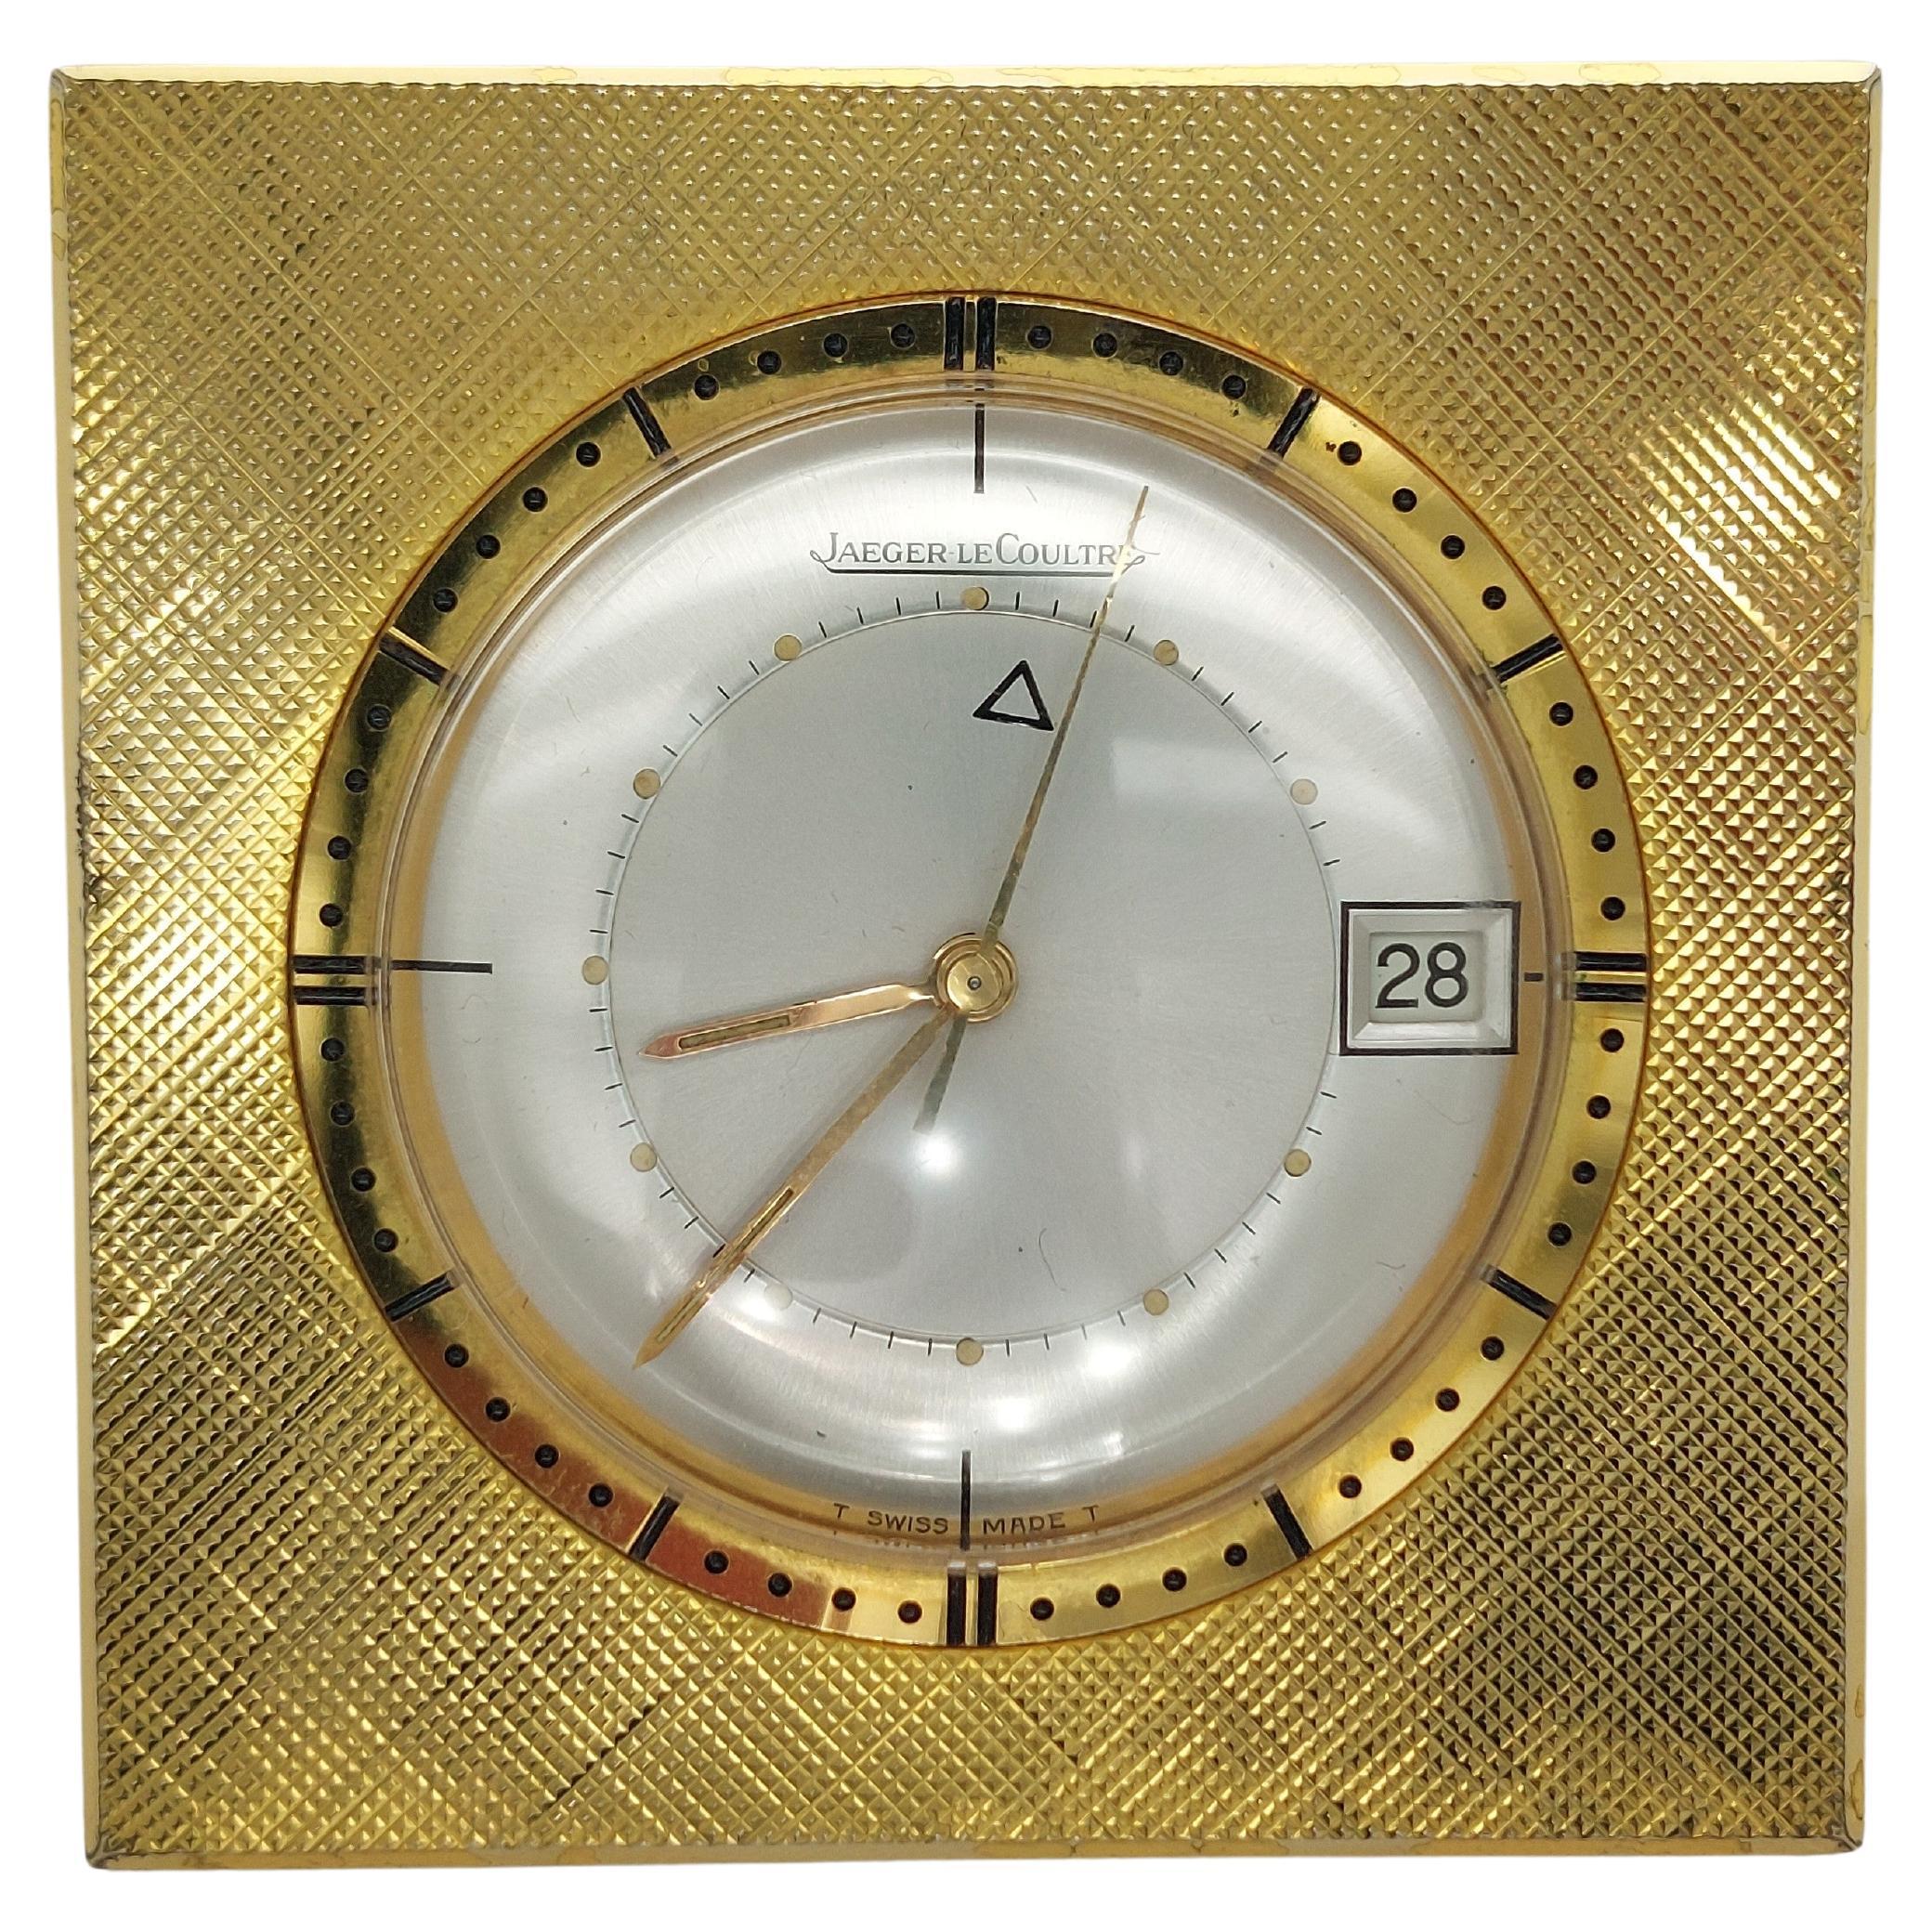 Travel Alarm Clock Made by Jaeger Le Coultre, Memovox Model, Switzerland For Sale